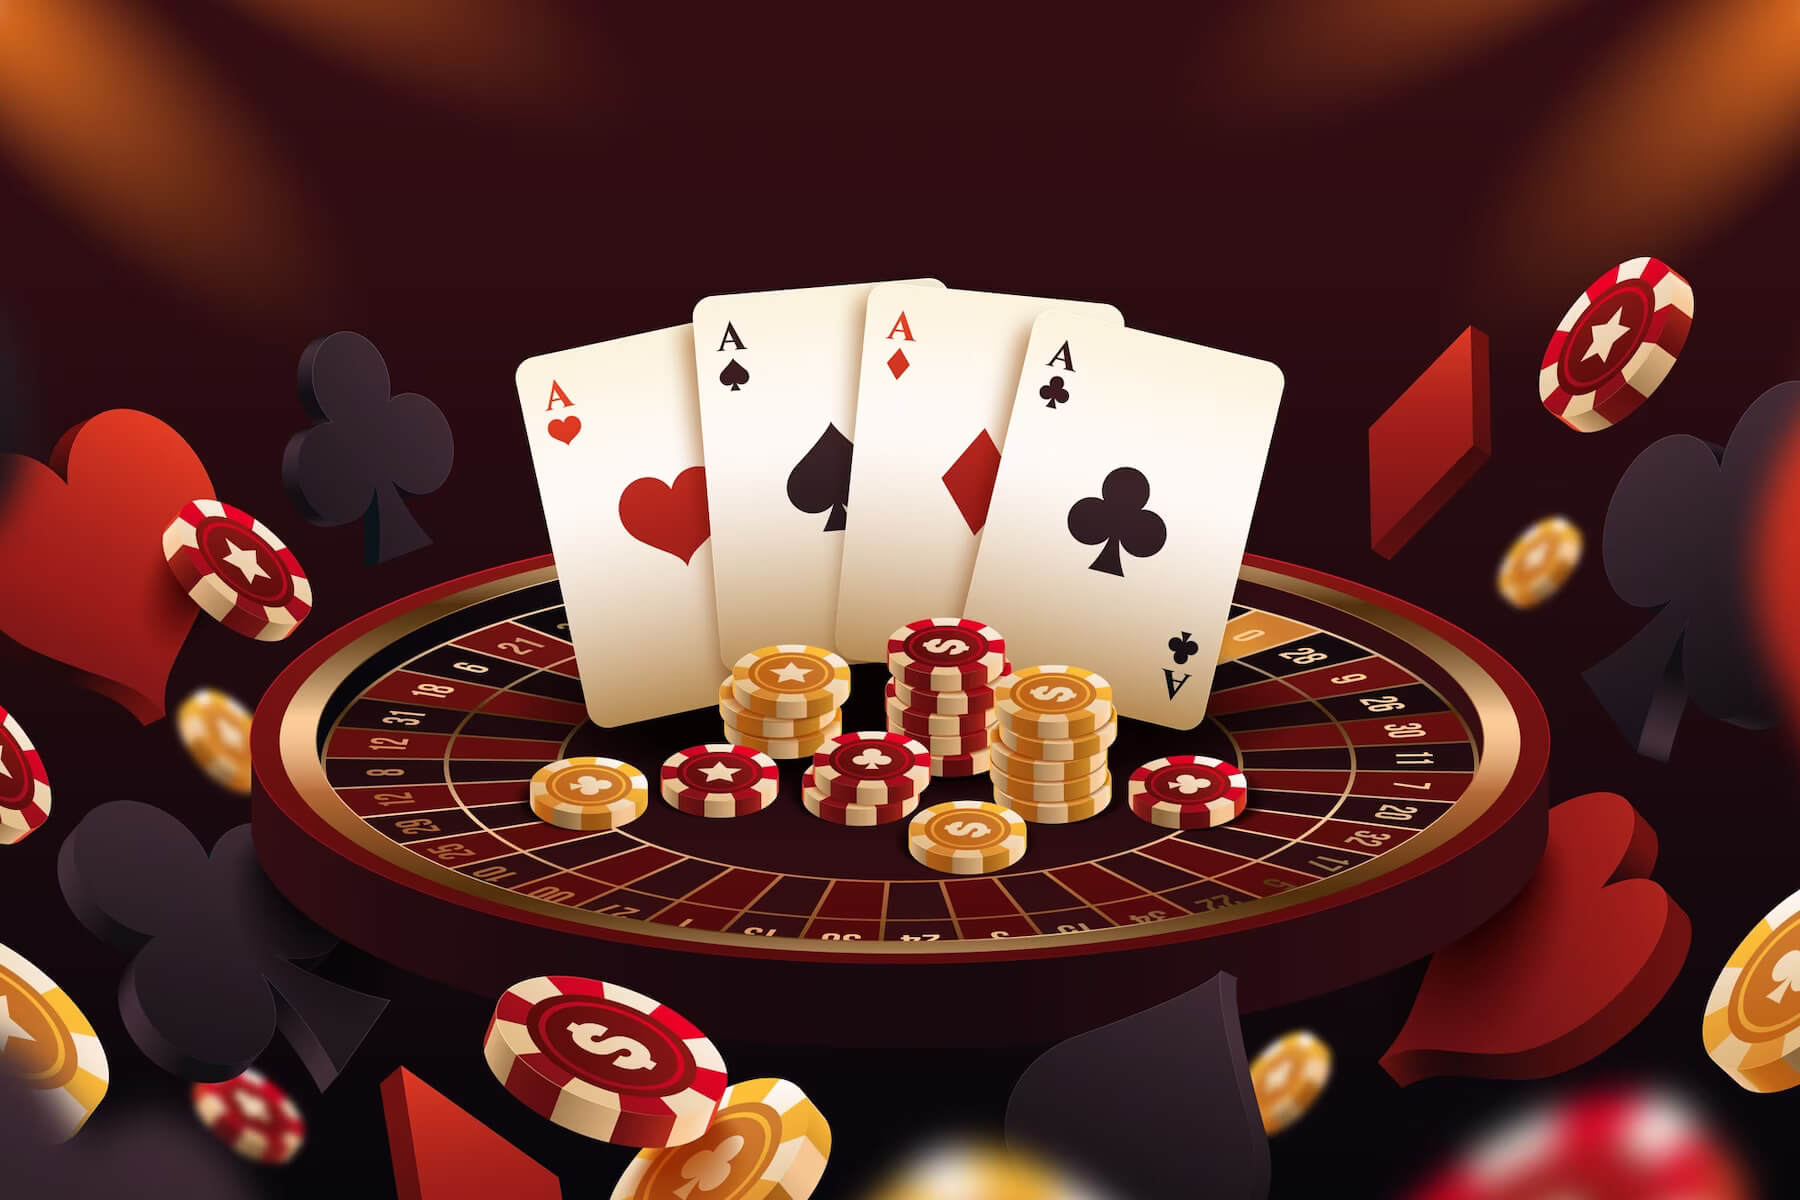 Play Online Casino Games With Thrilling 2500 + Games And Minimum Deposit Of $10